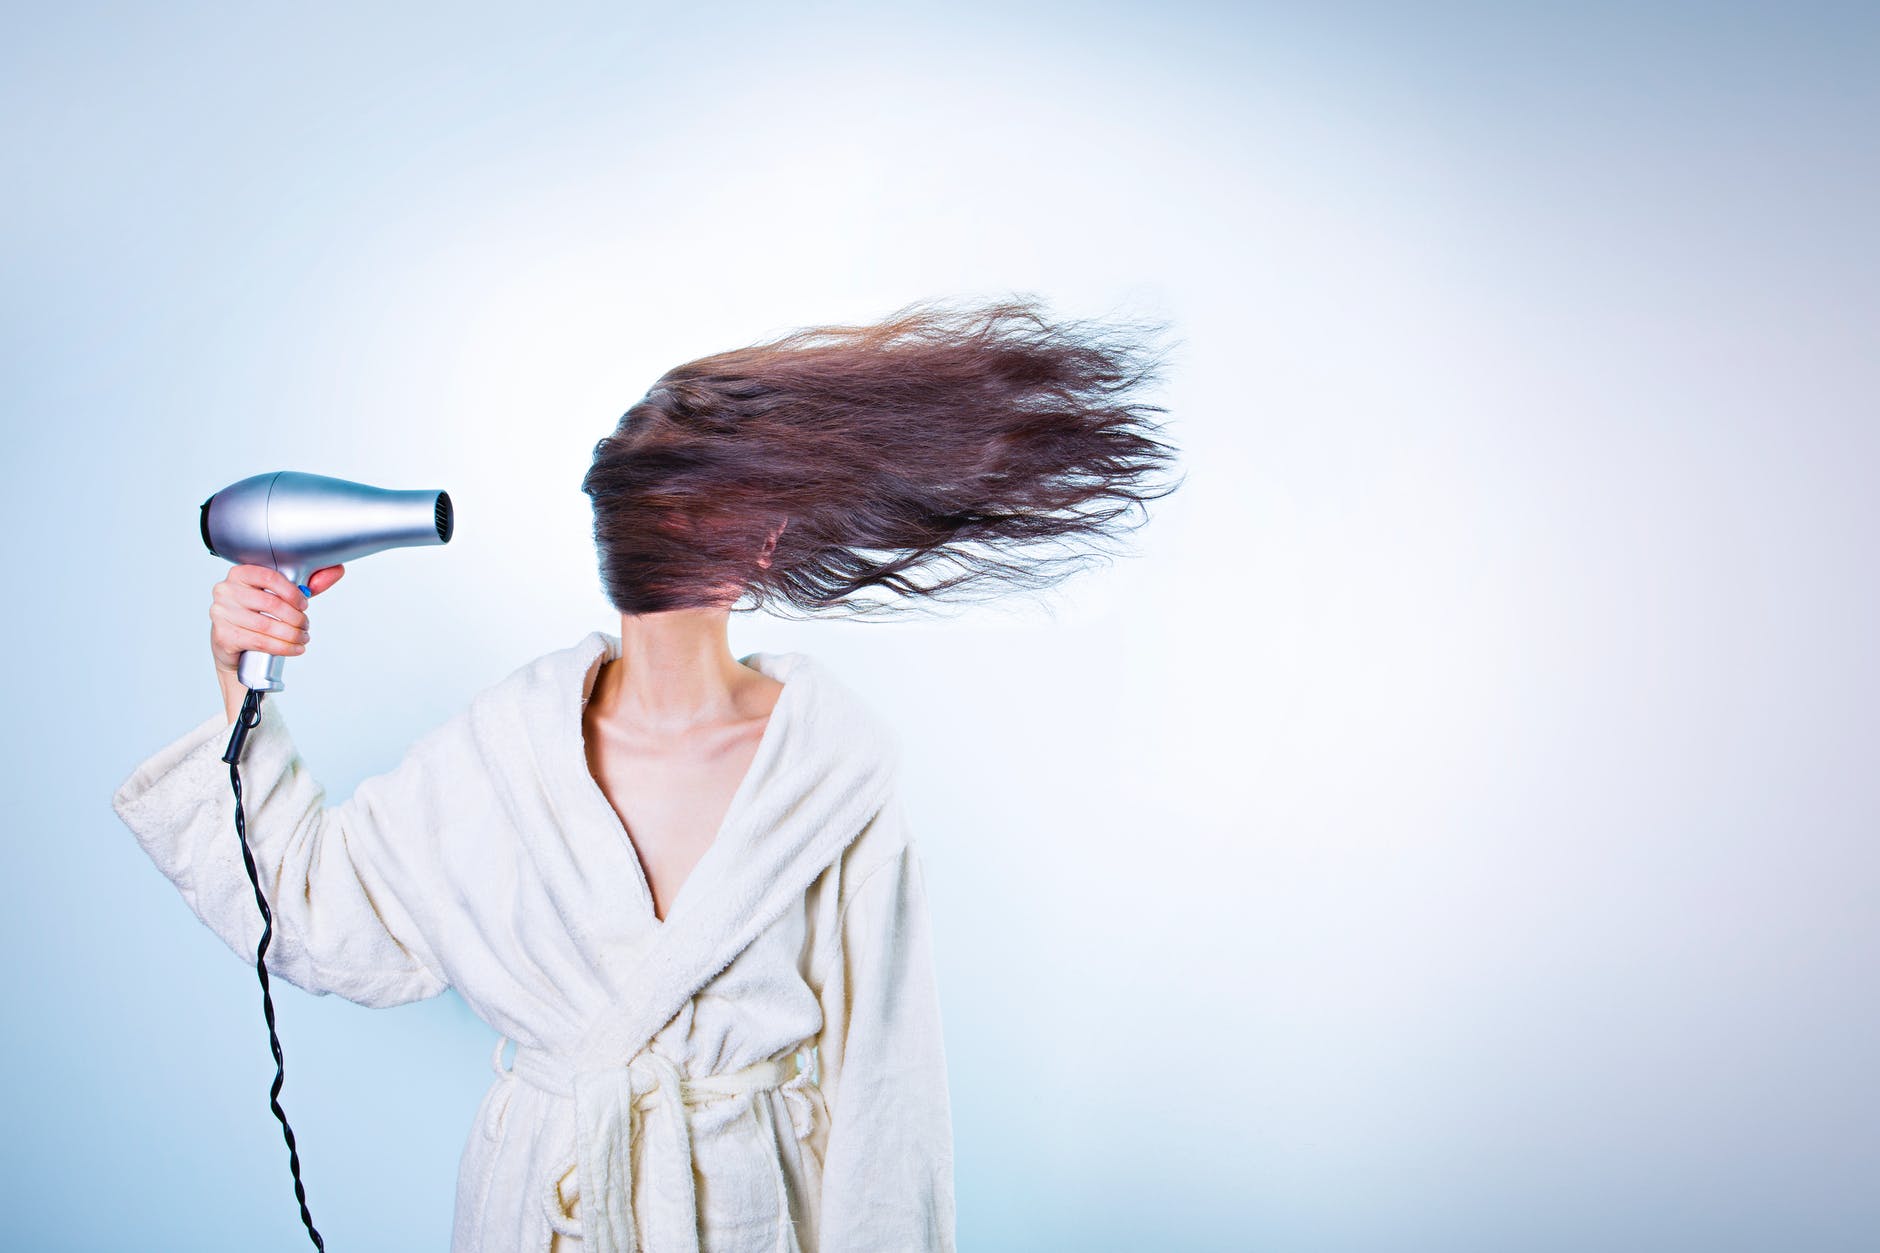 Protein or Moisture – Your hair may need either, or both